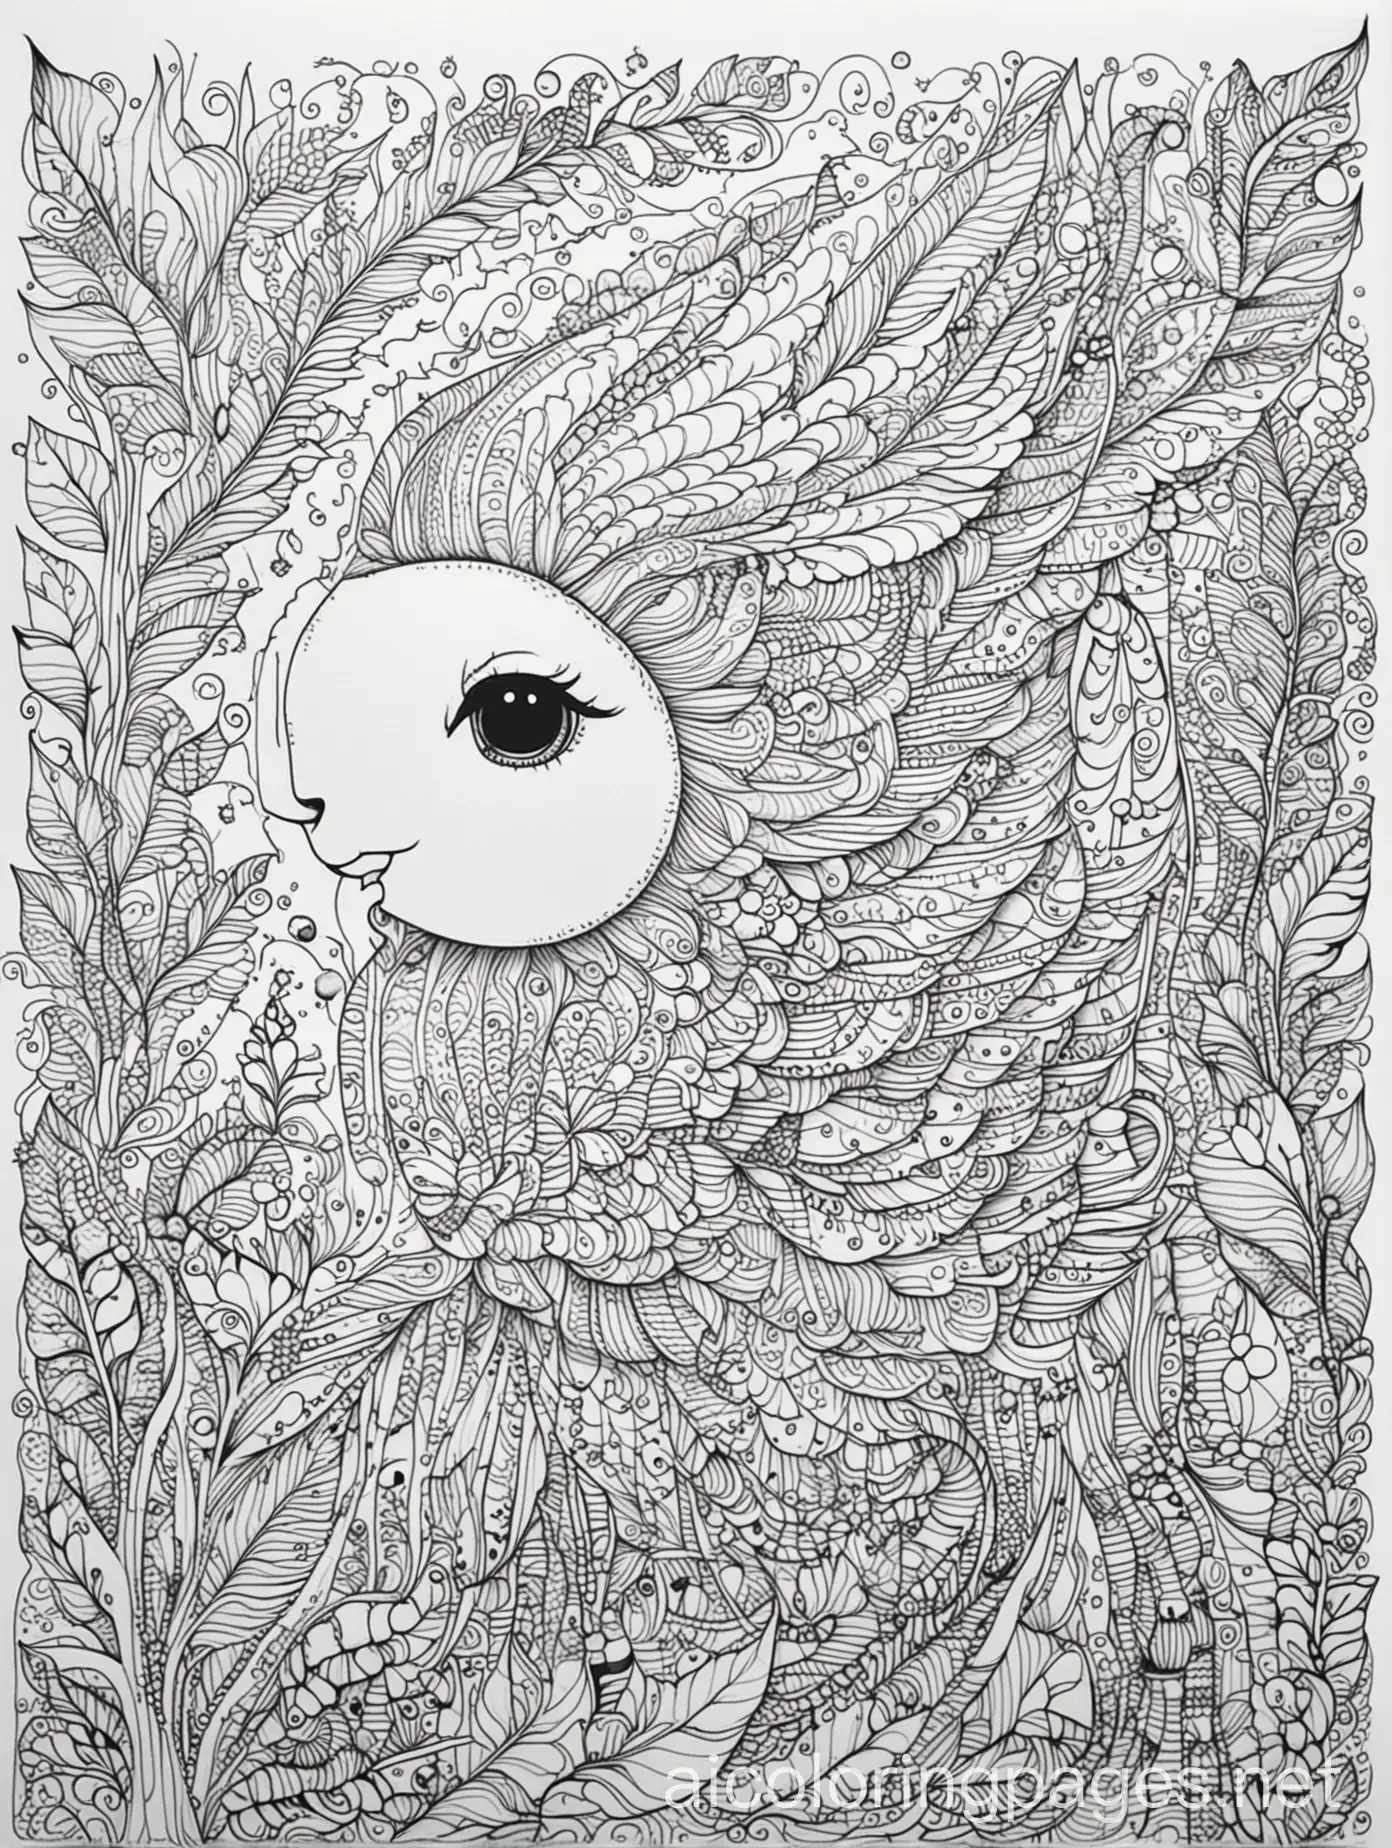 Whimsical adult coloring book page black and white outline with intricate detail, Coloring Page, black and white, line art, white background, Simplicity, Ample White Space. The background of the coloring page is plain white to make it easy for young children to color within the lines. The outlines of all the subjects are easy to distinguish, making it simple for kids to color without too much difficulty